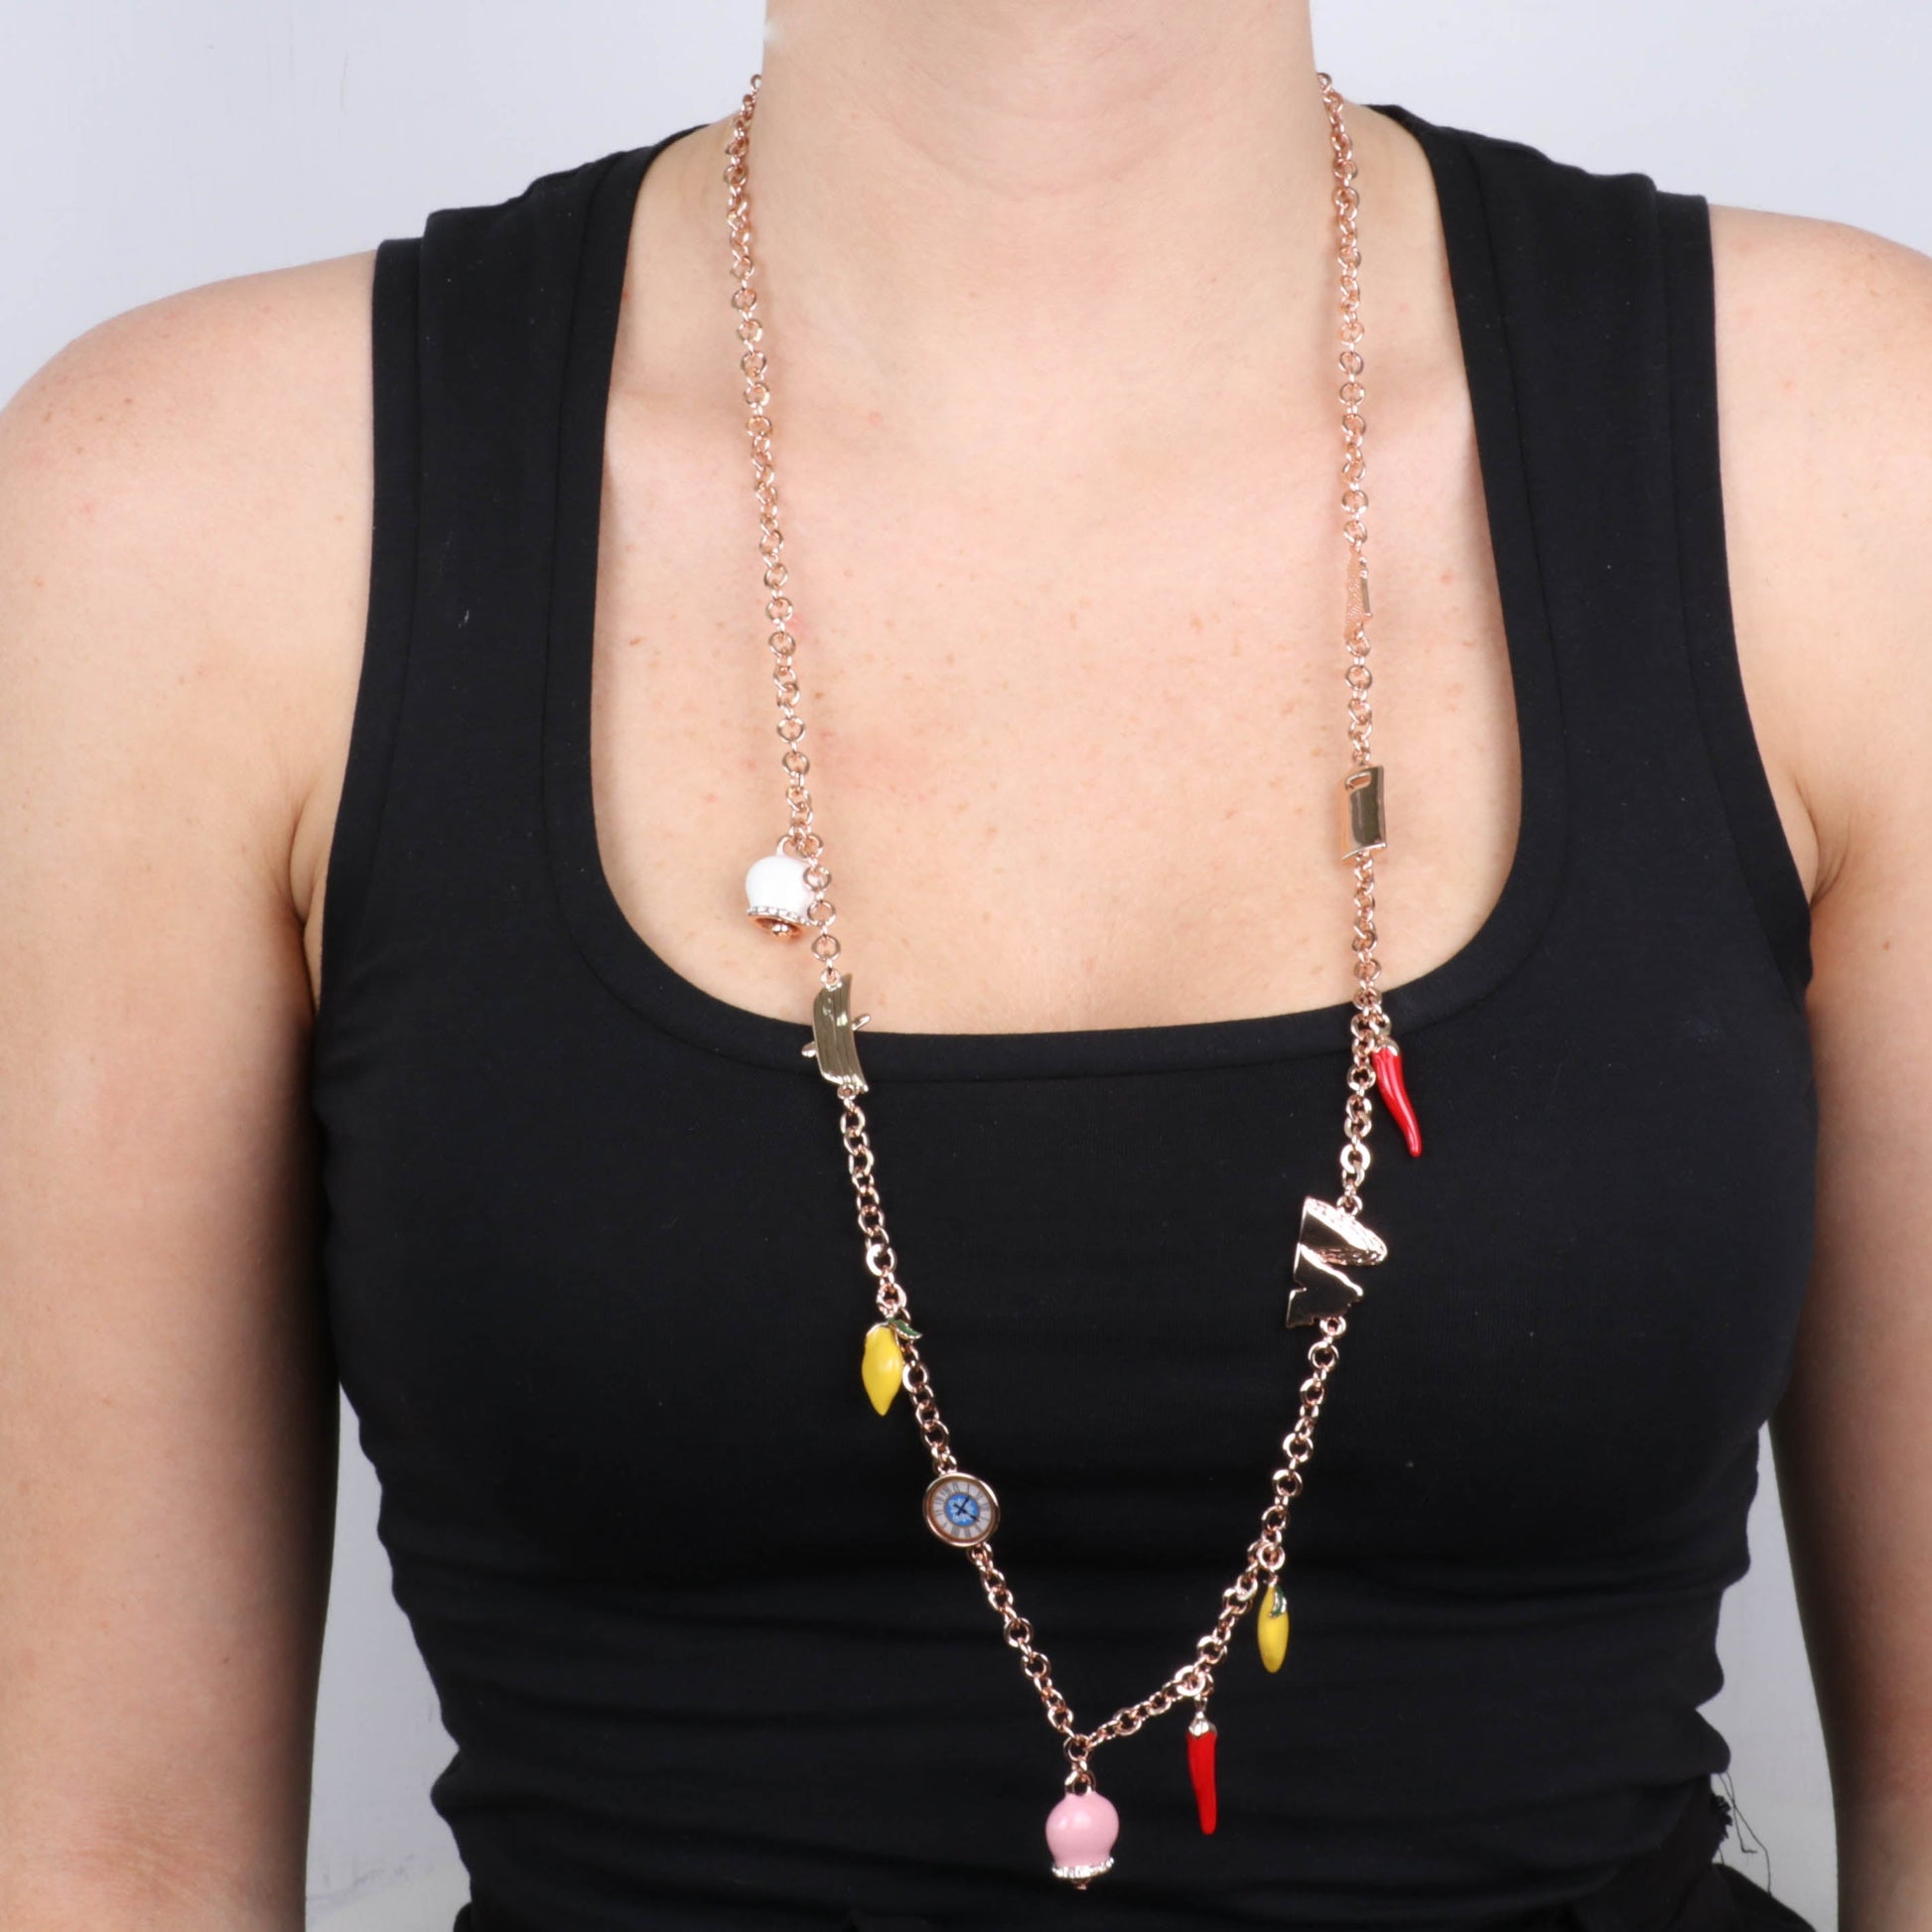 Metal necklace with charms inspired by the island of Capri, embellished with colored enamels and crystals